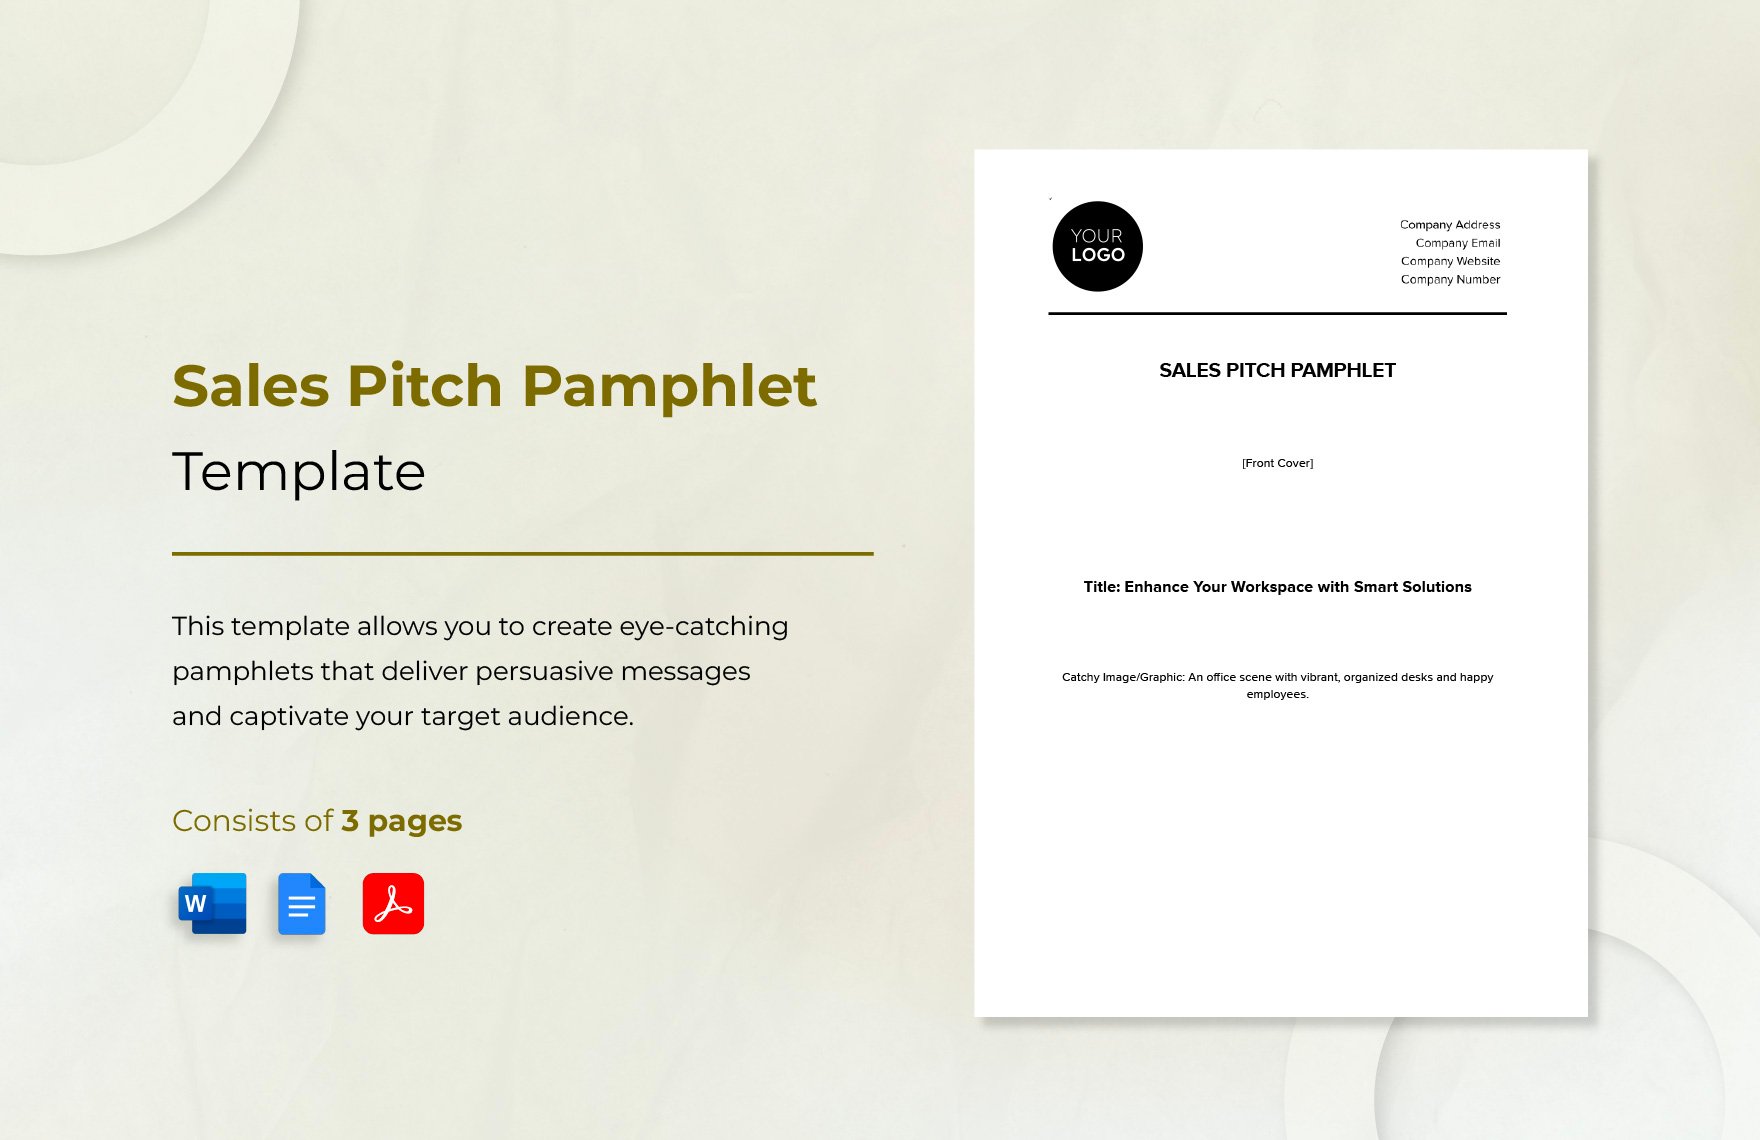 Sales Pitch Pamphlet Template